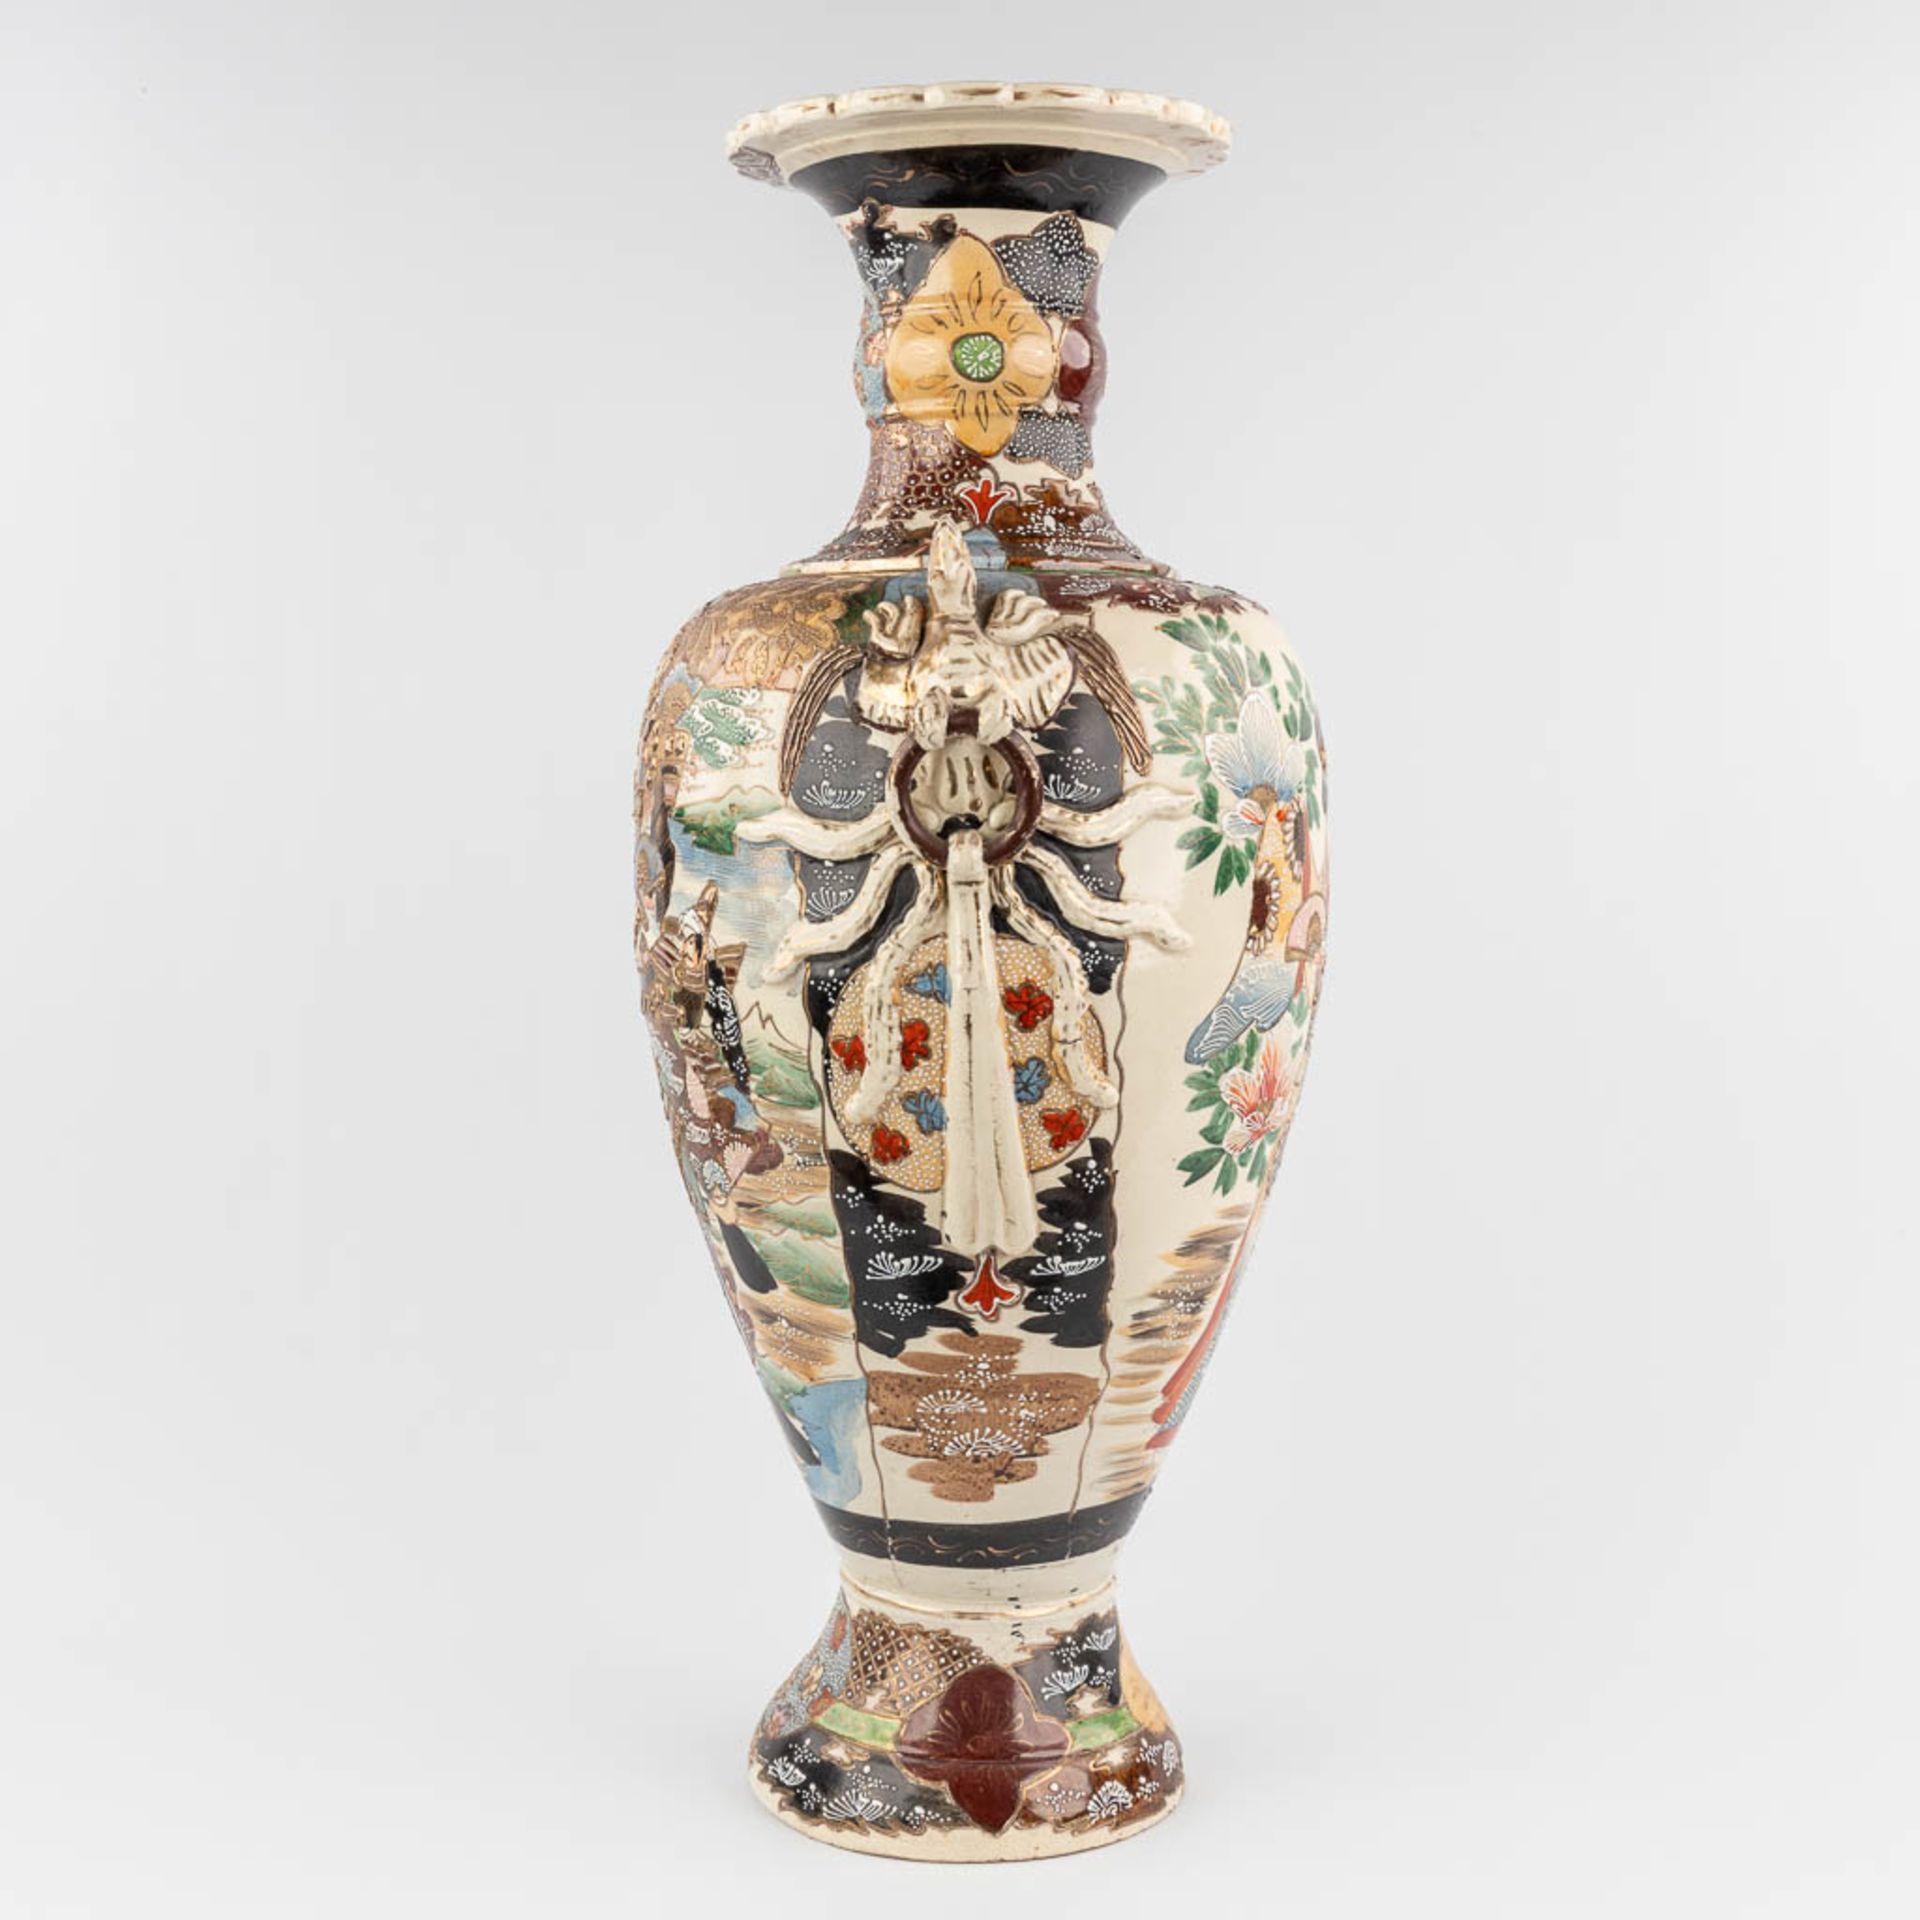 A large and decorative Japanese Satsuma vase. 20th C. (H:80 x D:32 cm) - Image 6 of 16